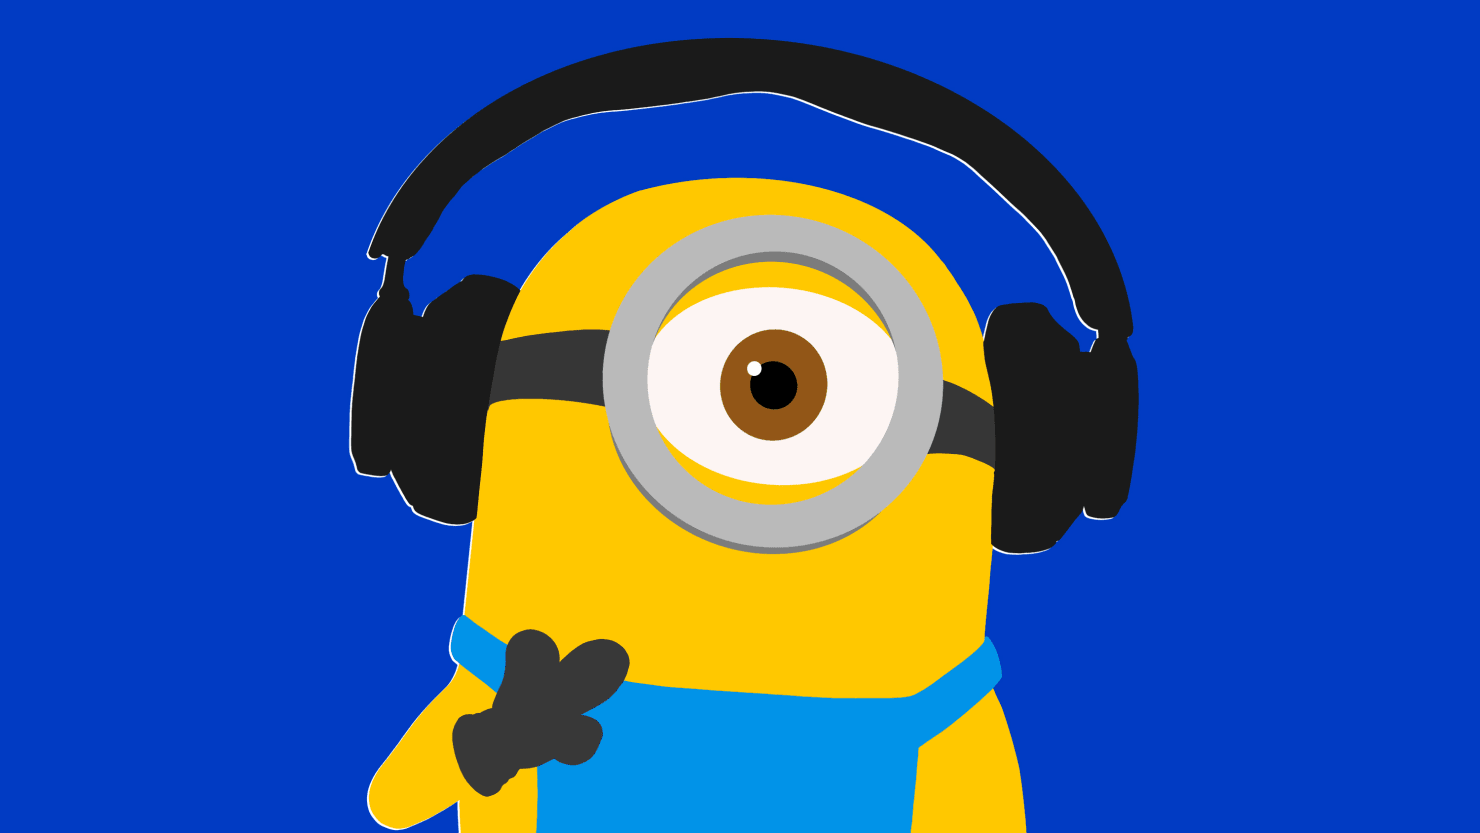 Minions: The Rise Of Gru (Various Artists): Various Artists: :  Music